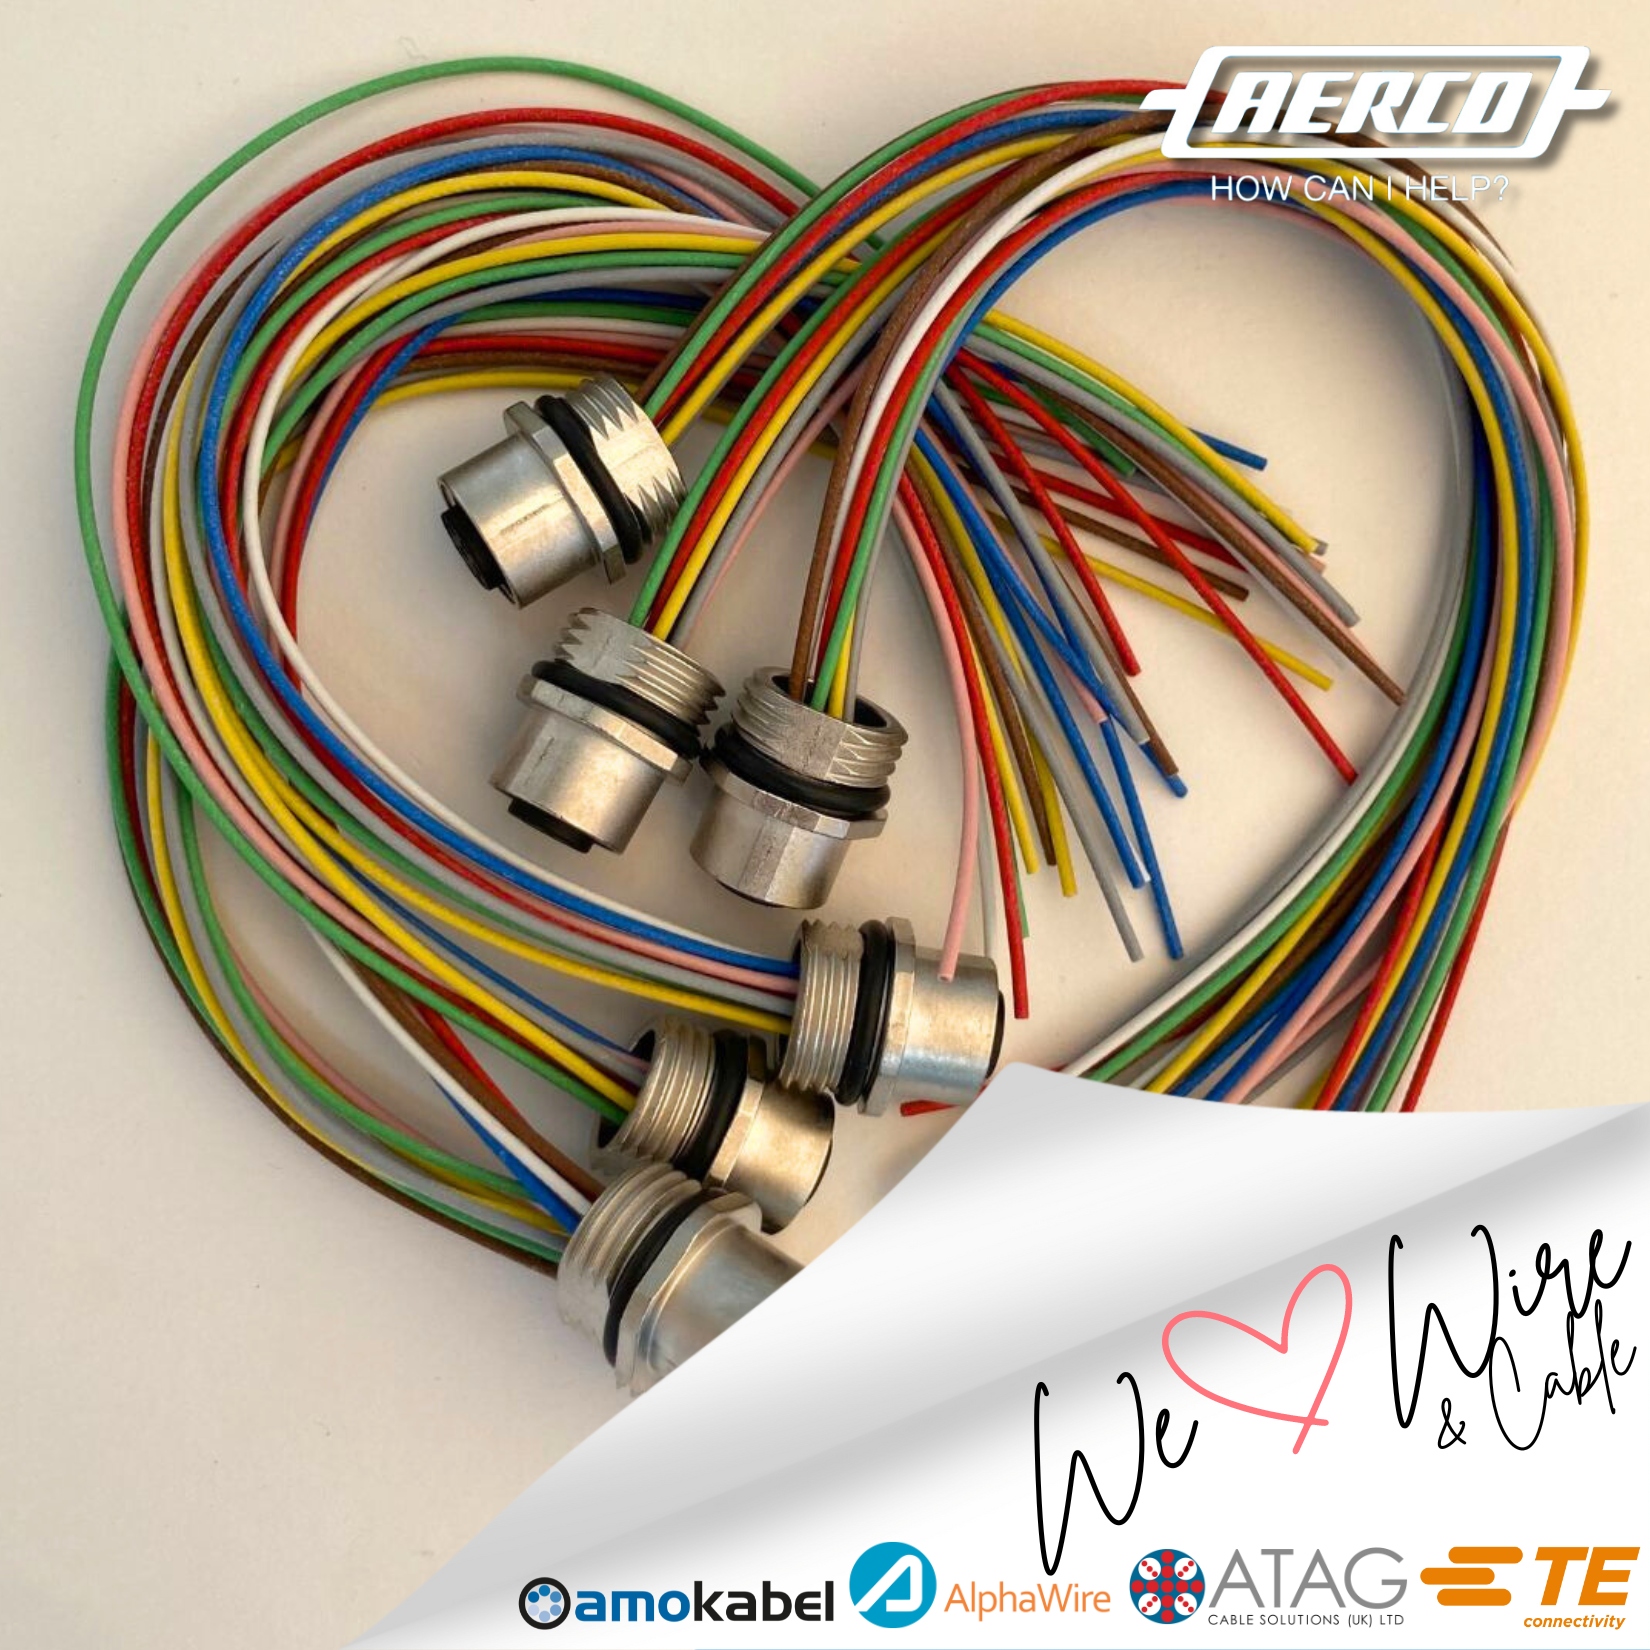 At Aerco we love cable